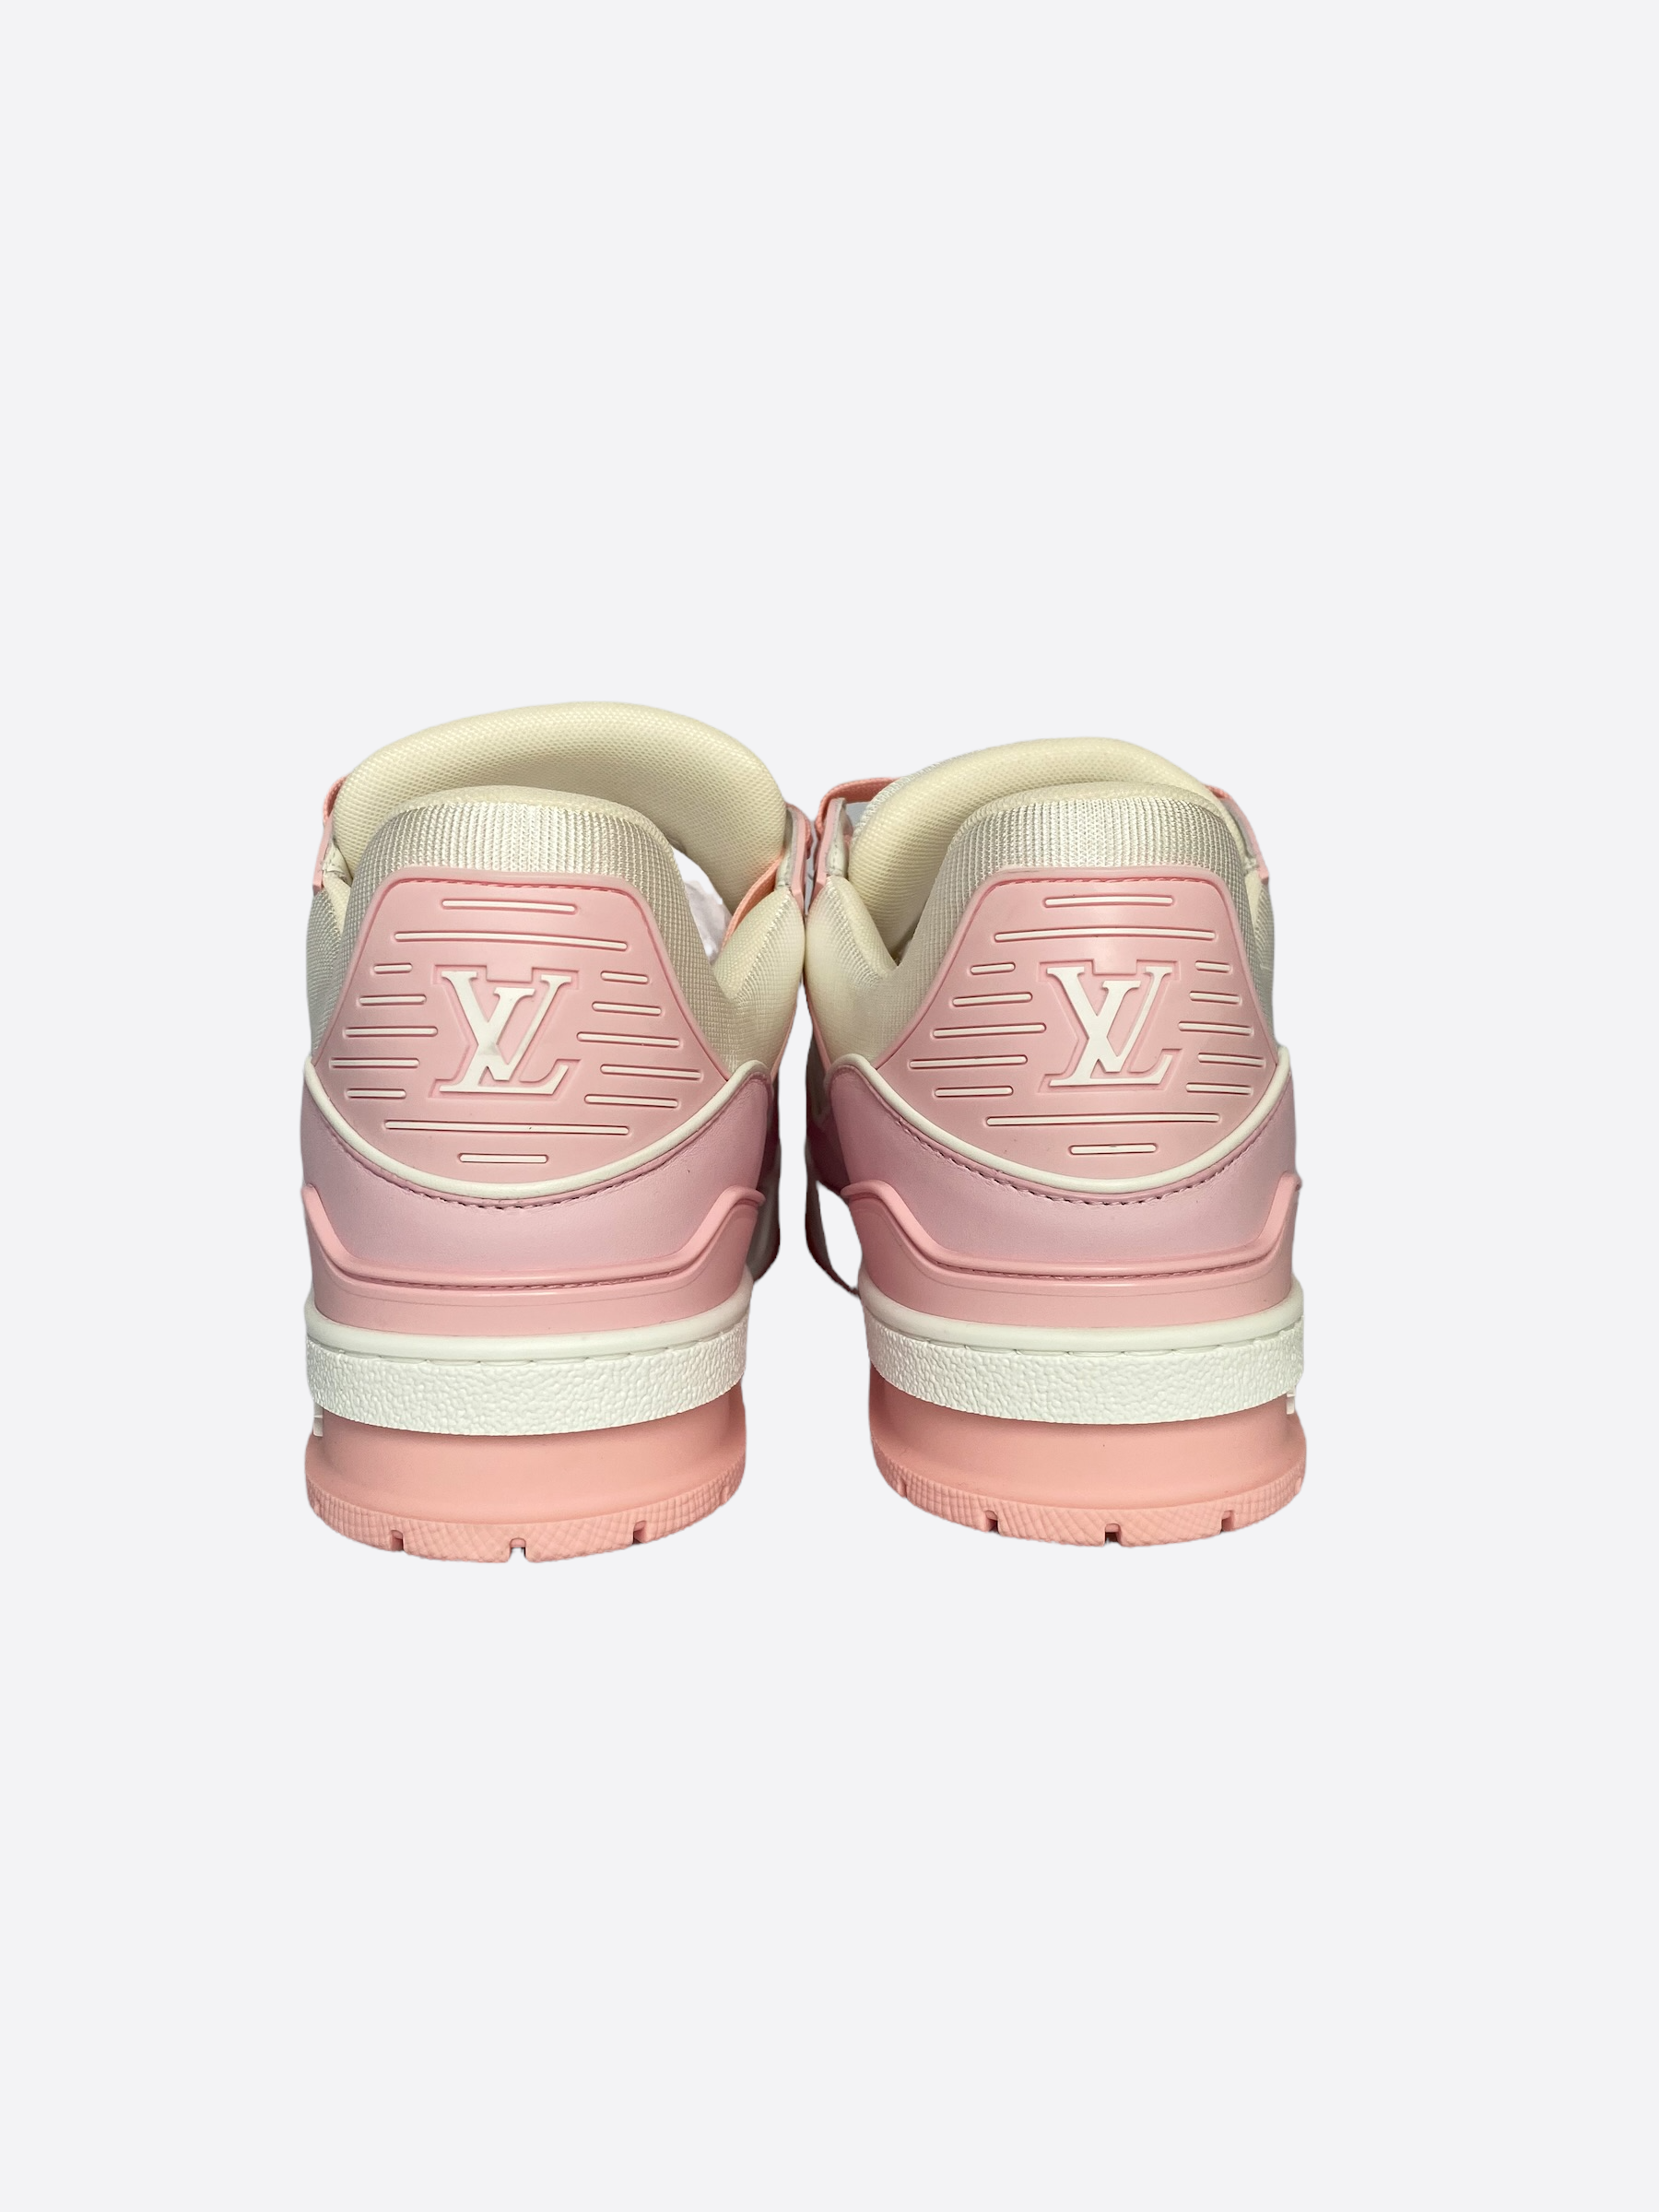 Louis Vuitton, Shoes, Louis Vuitton Pink And Brown Trainers